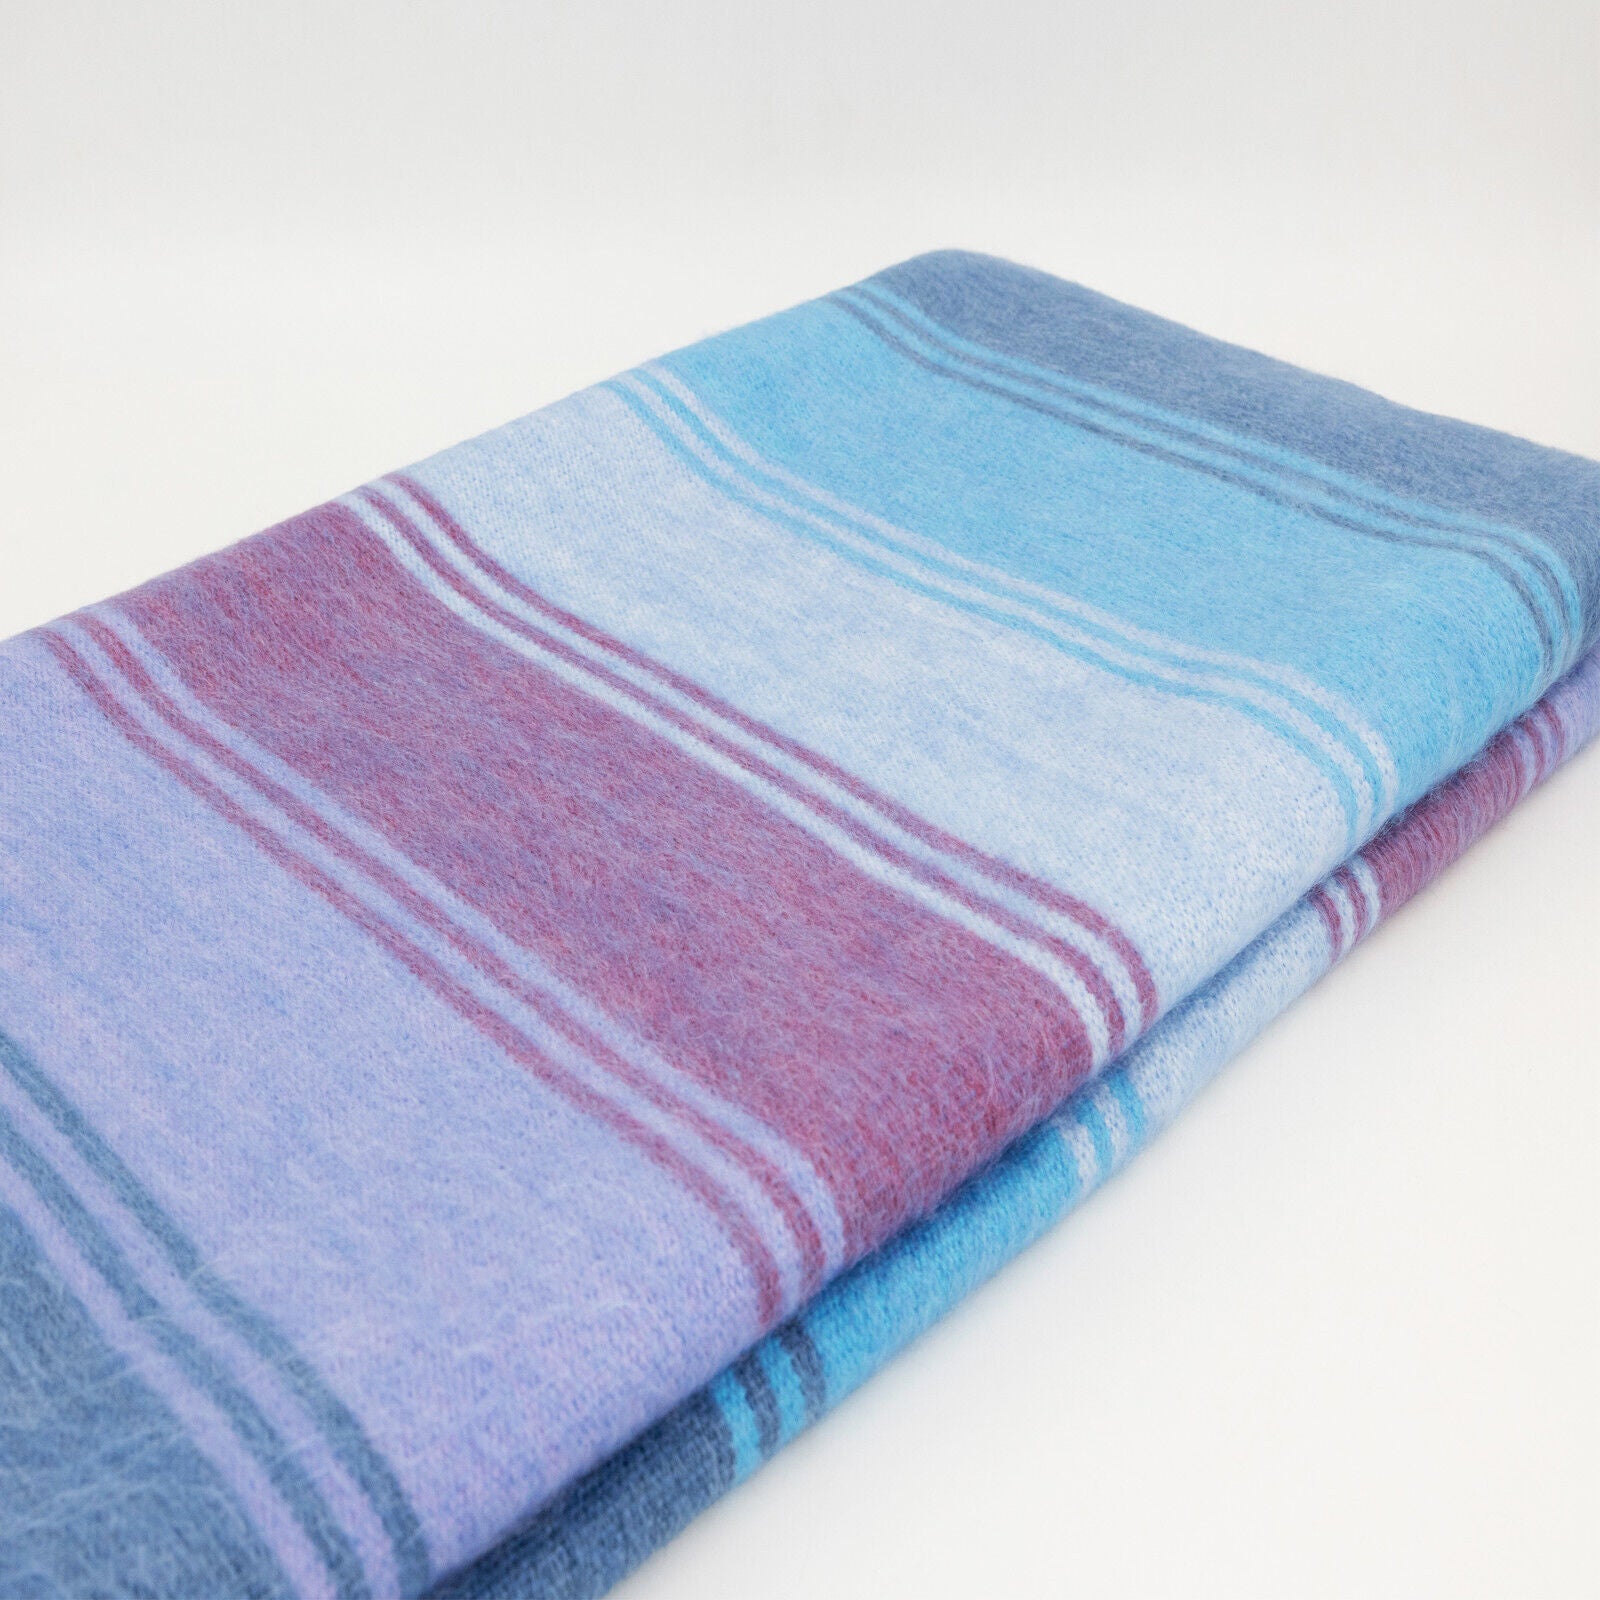 Tinizaray - Baby Alpaca Wool Throw Blanket / Sofa Cover - Queen 95 x 67 in - purple/turquoise colors